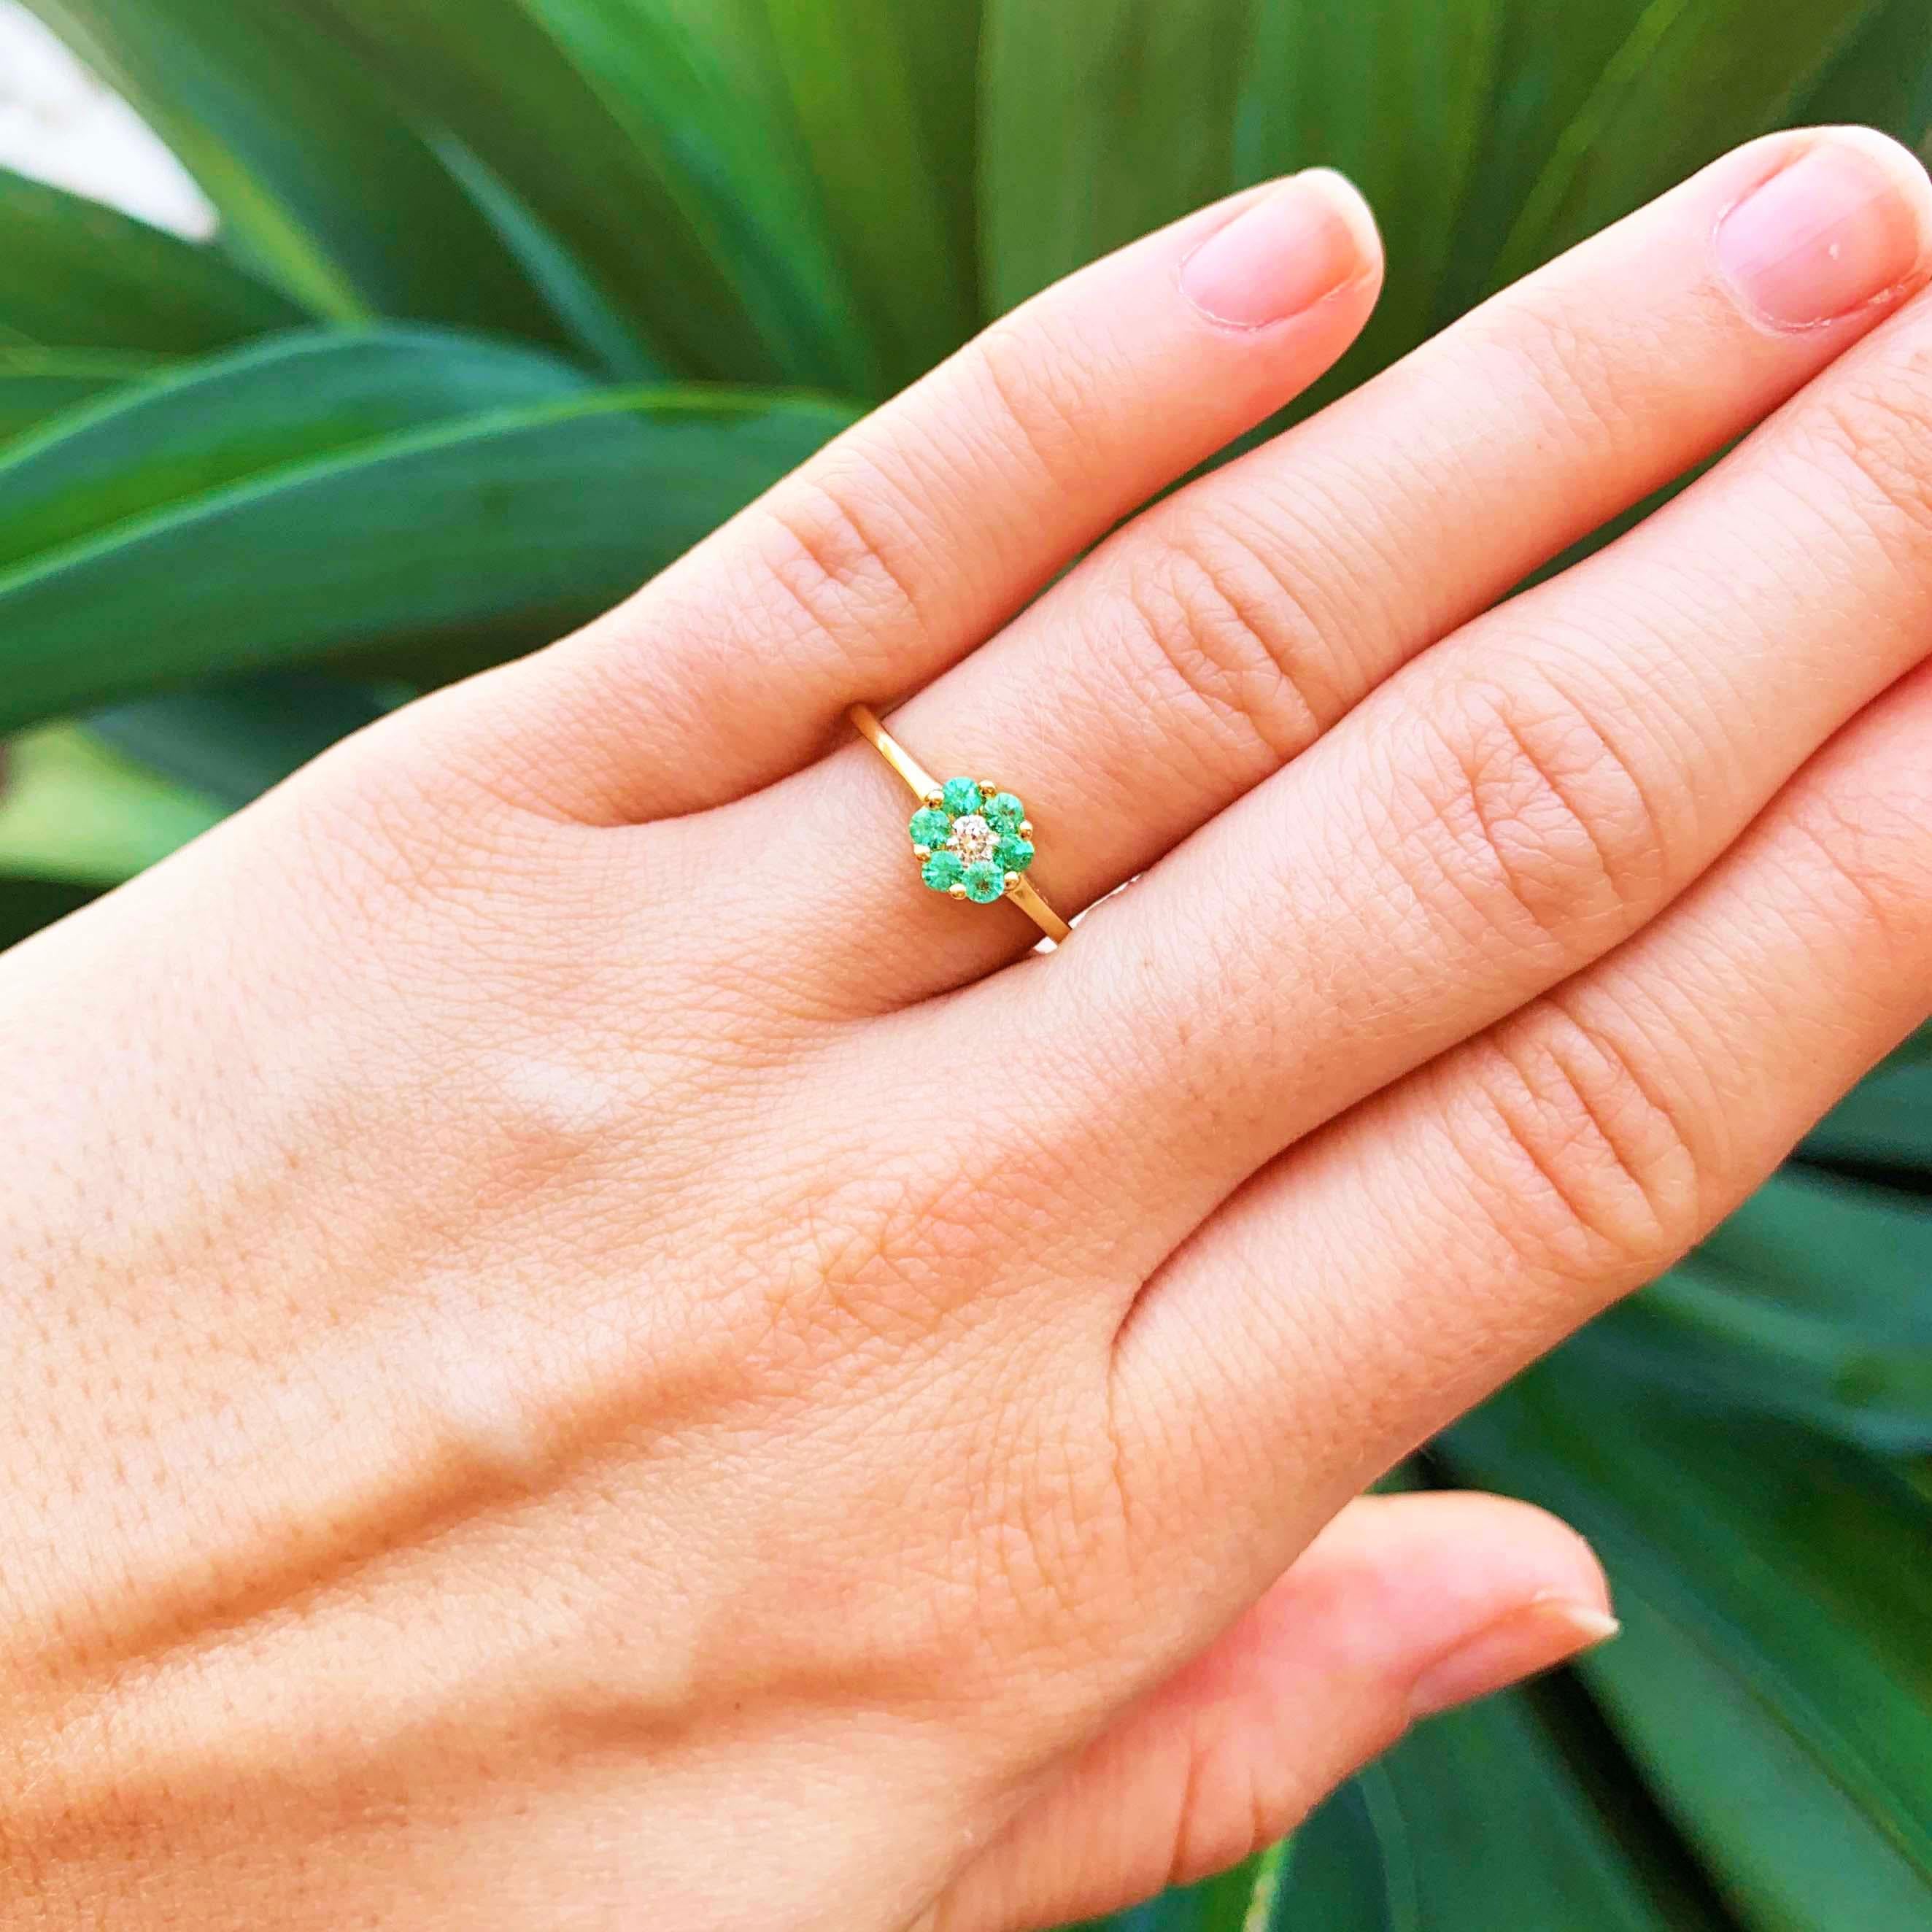 Celebrate a May loved one with this emerald flower ring! This is a gorgeous and versatile ring that can be worn all year round! The petite flower is adorable with beautiful green emerald 